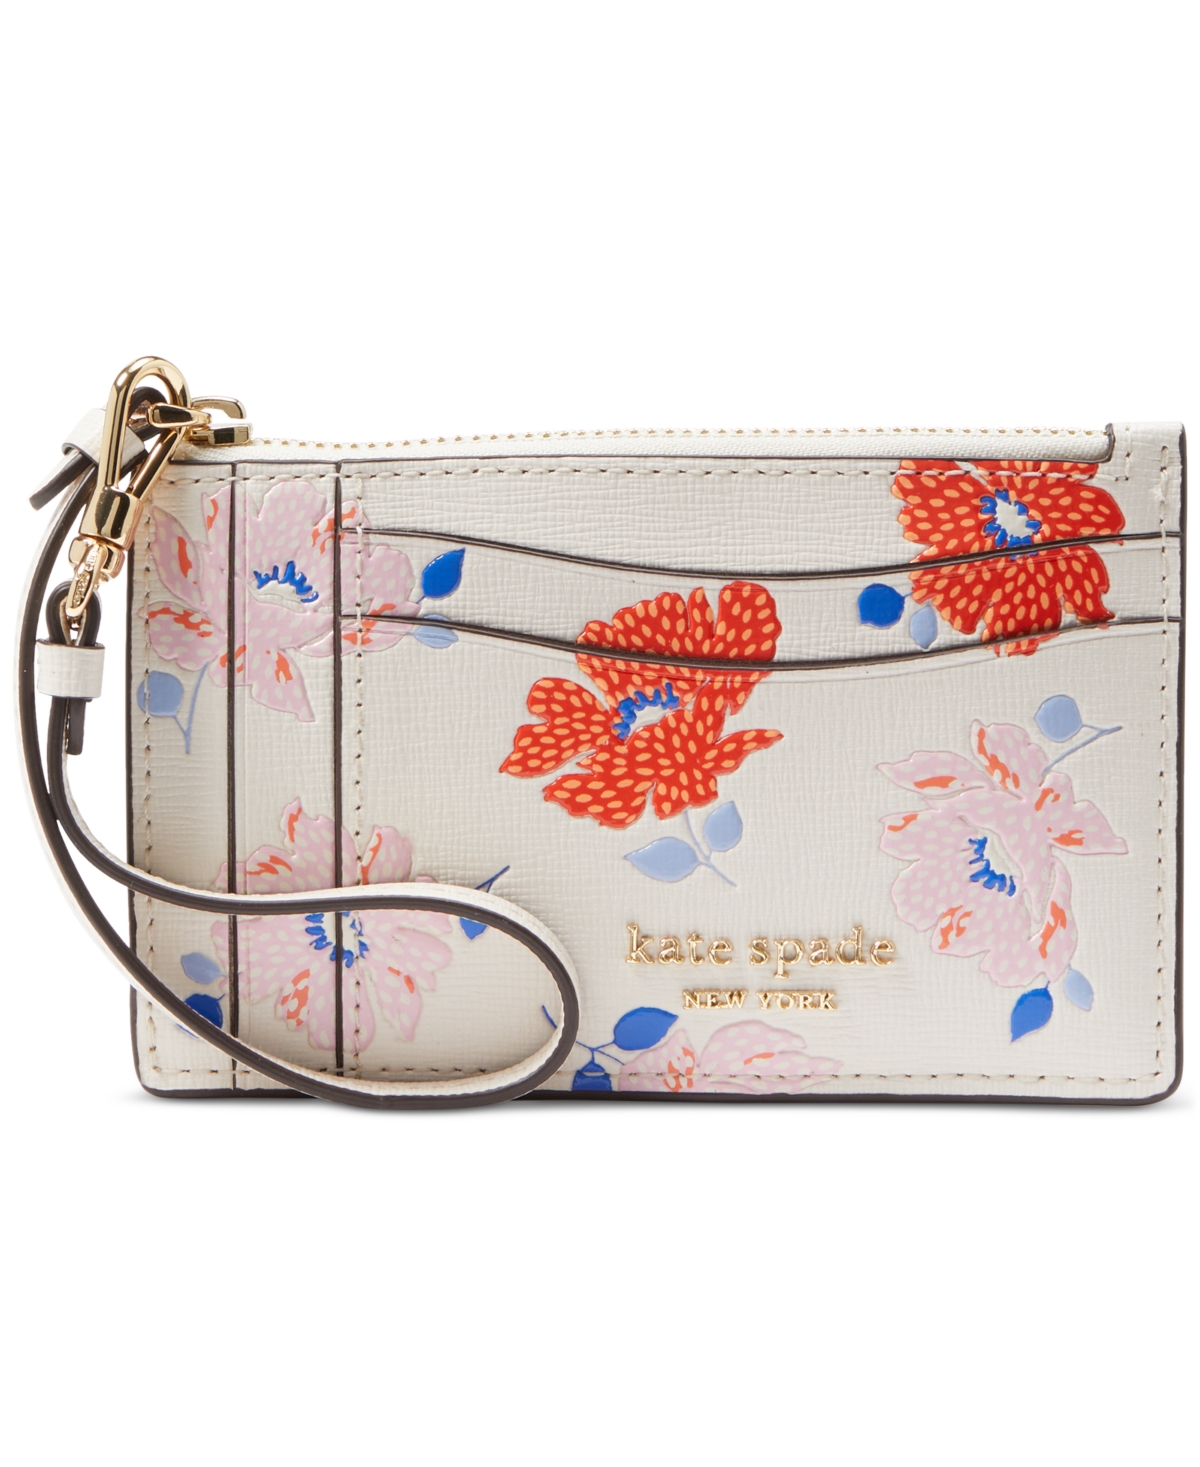 Morgan Dotty Floral Embossed Saffiano Leather Coin Card Case Wristlet - White Multi